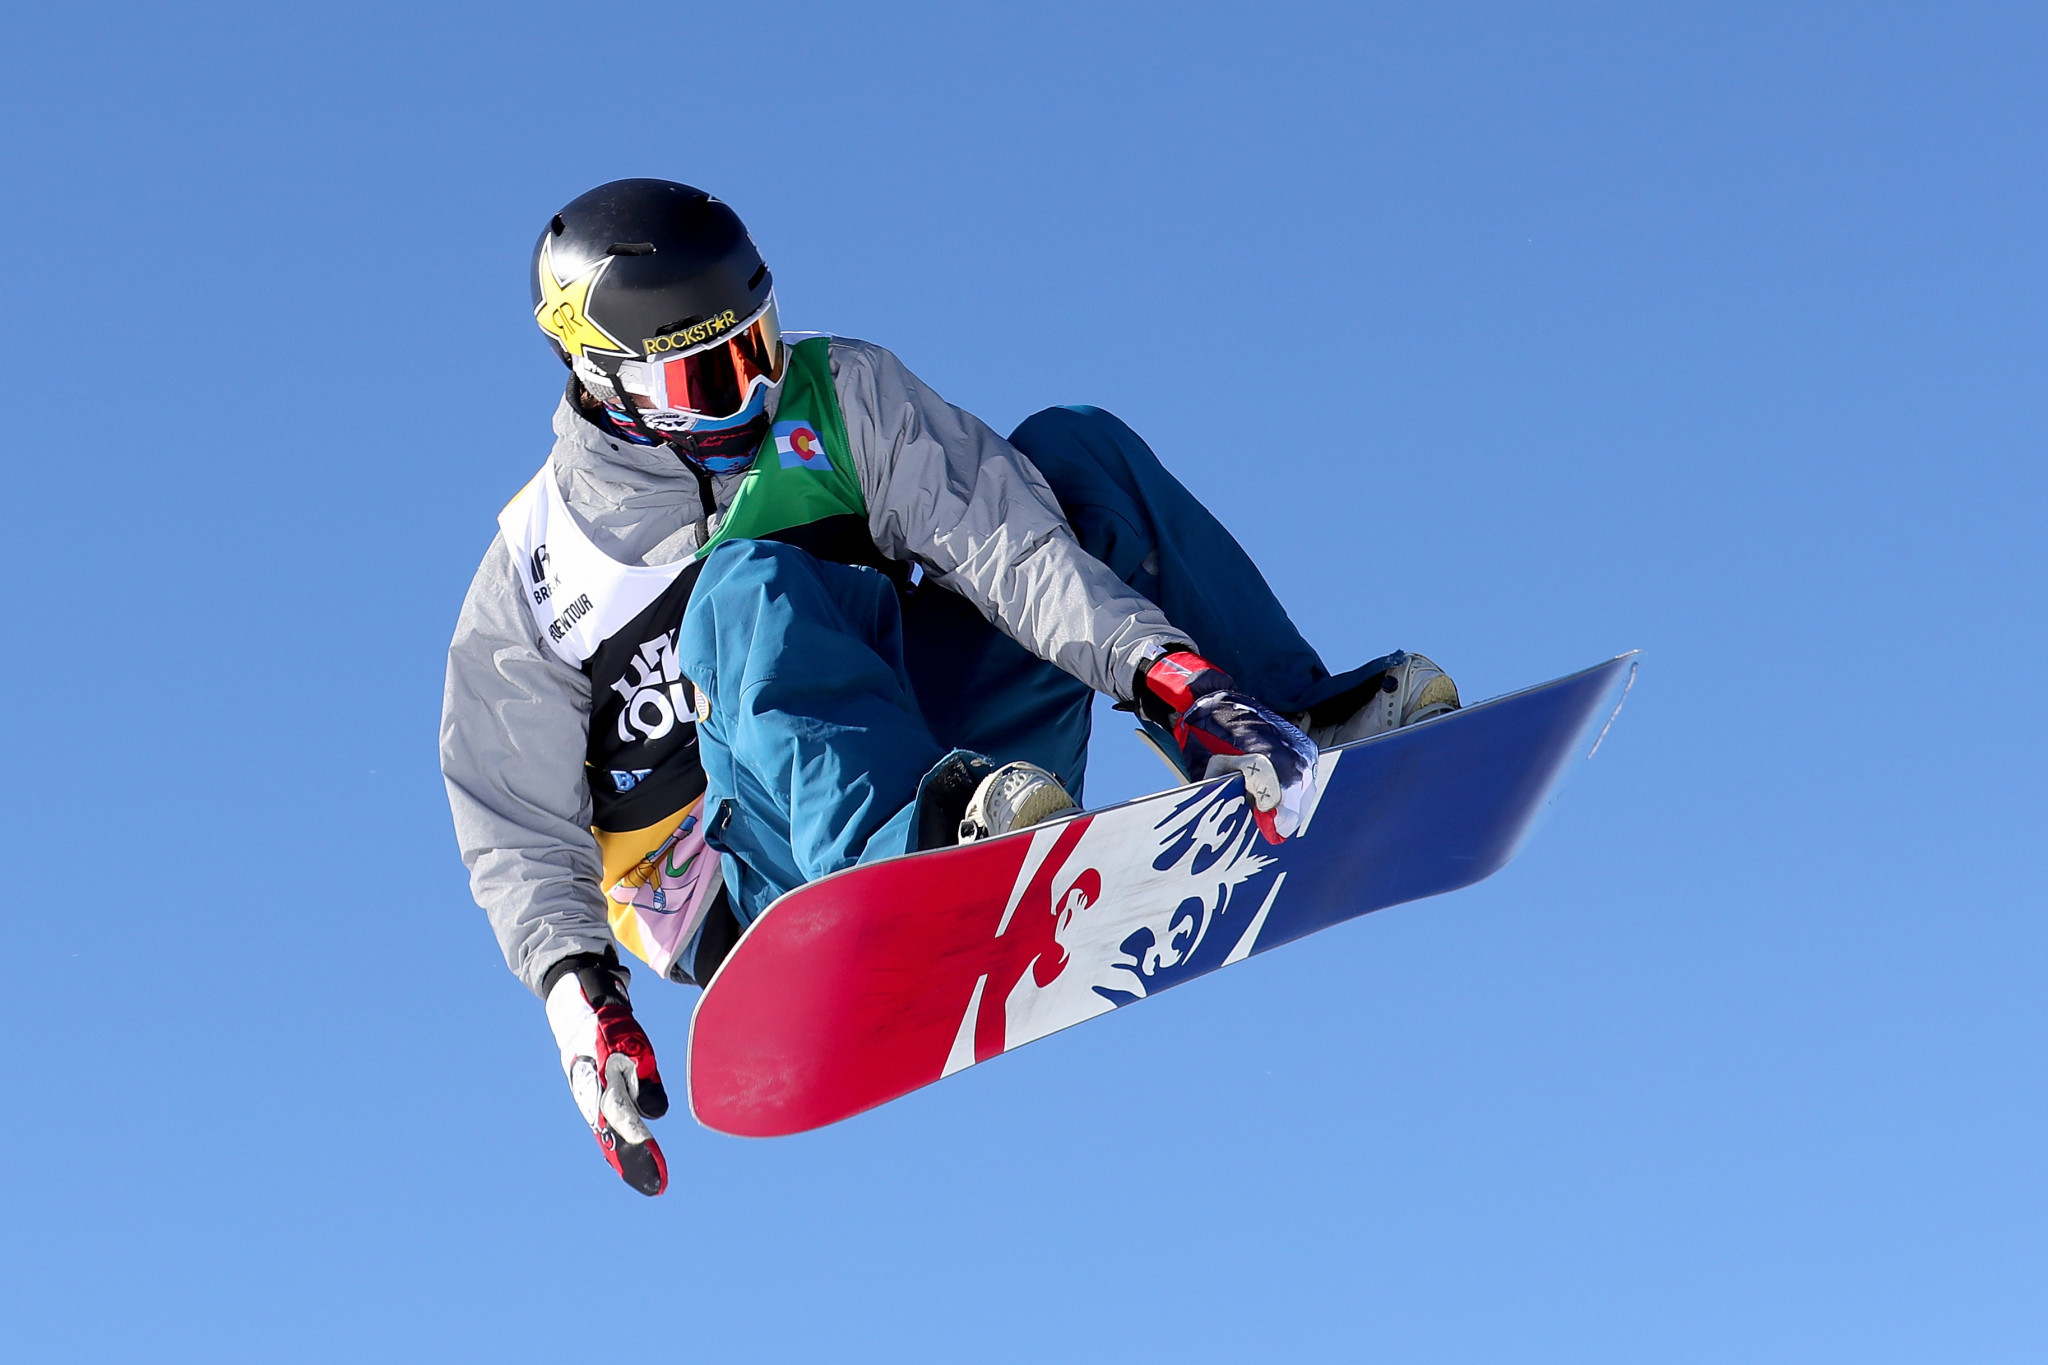 Corning and Norendal get first slopestyle FIS Snowboard World Cup victories in Laax